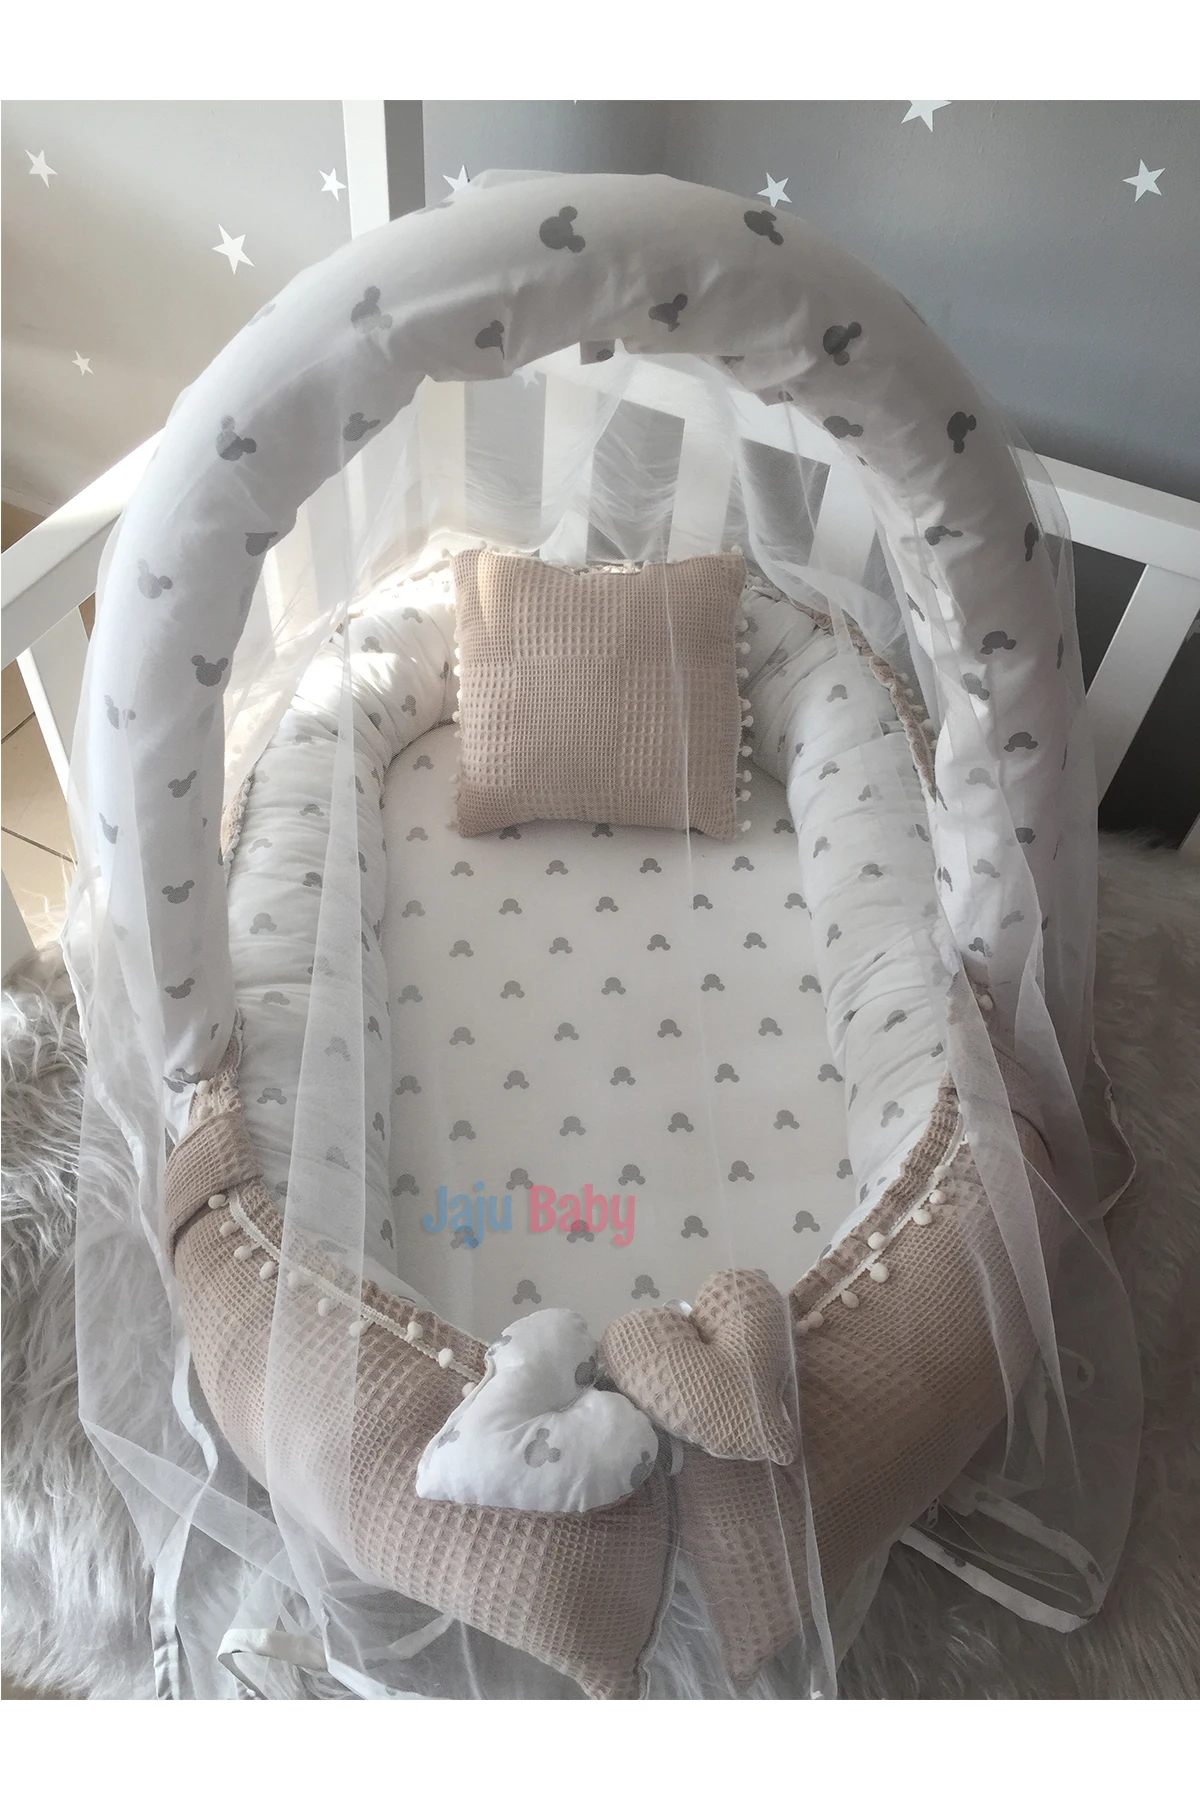 Jaju Baby Handmade Brown Waffle Piqué Fabric and Mouse Design Fabric Pompon Babynest Mosquito Net and Toy Apparatus Portable